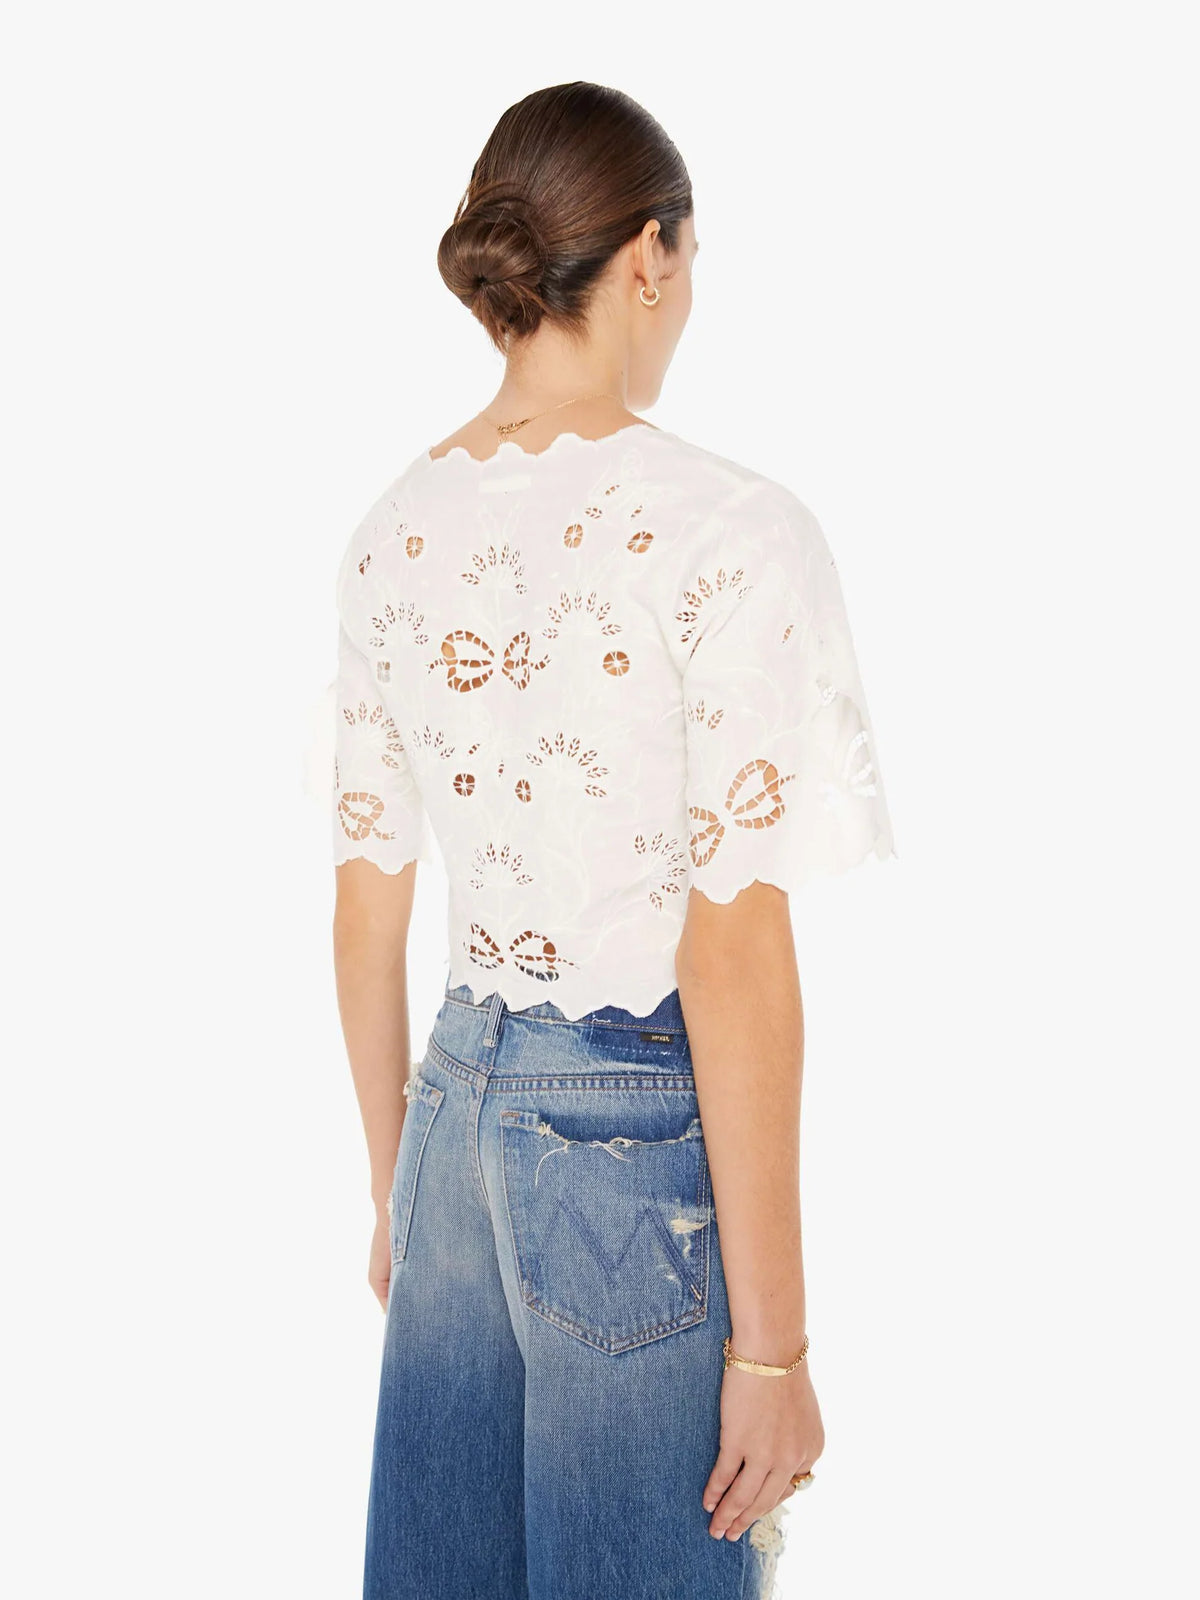 The Social Butterfly Top